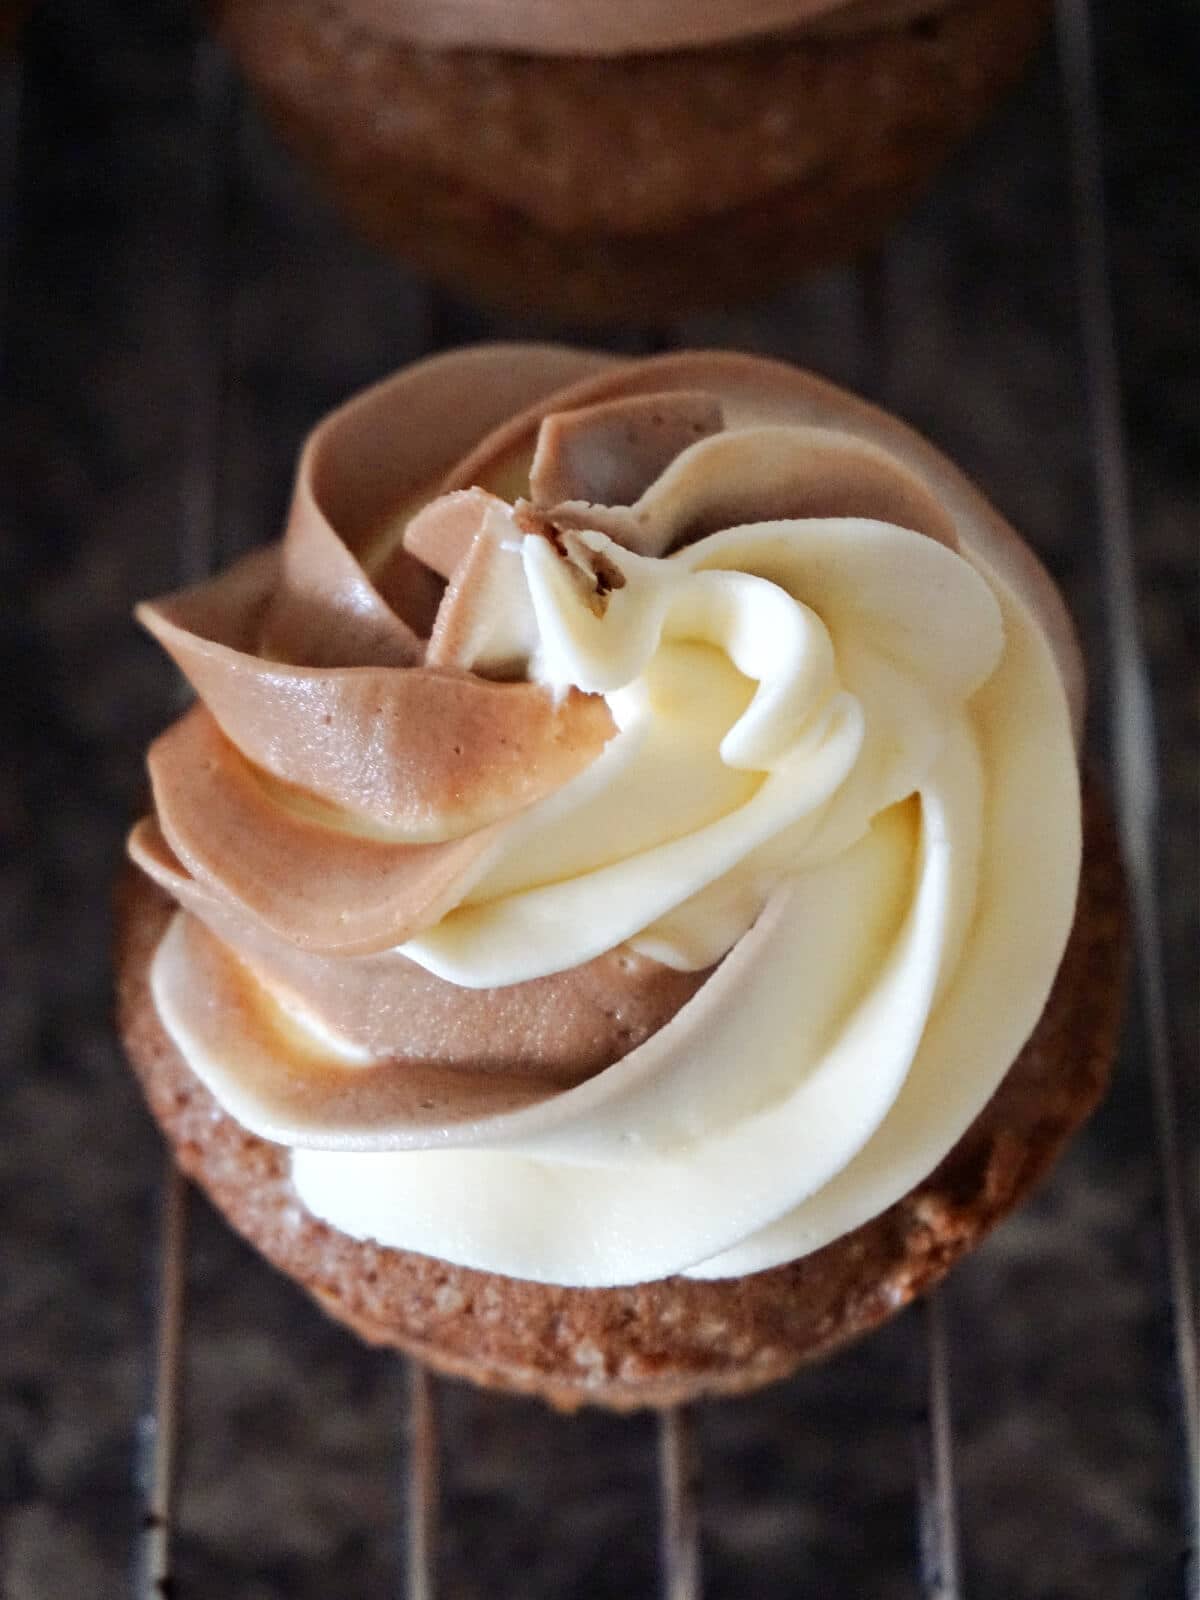 Close-up shot of a cupcake top that has duo icing.